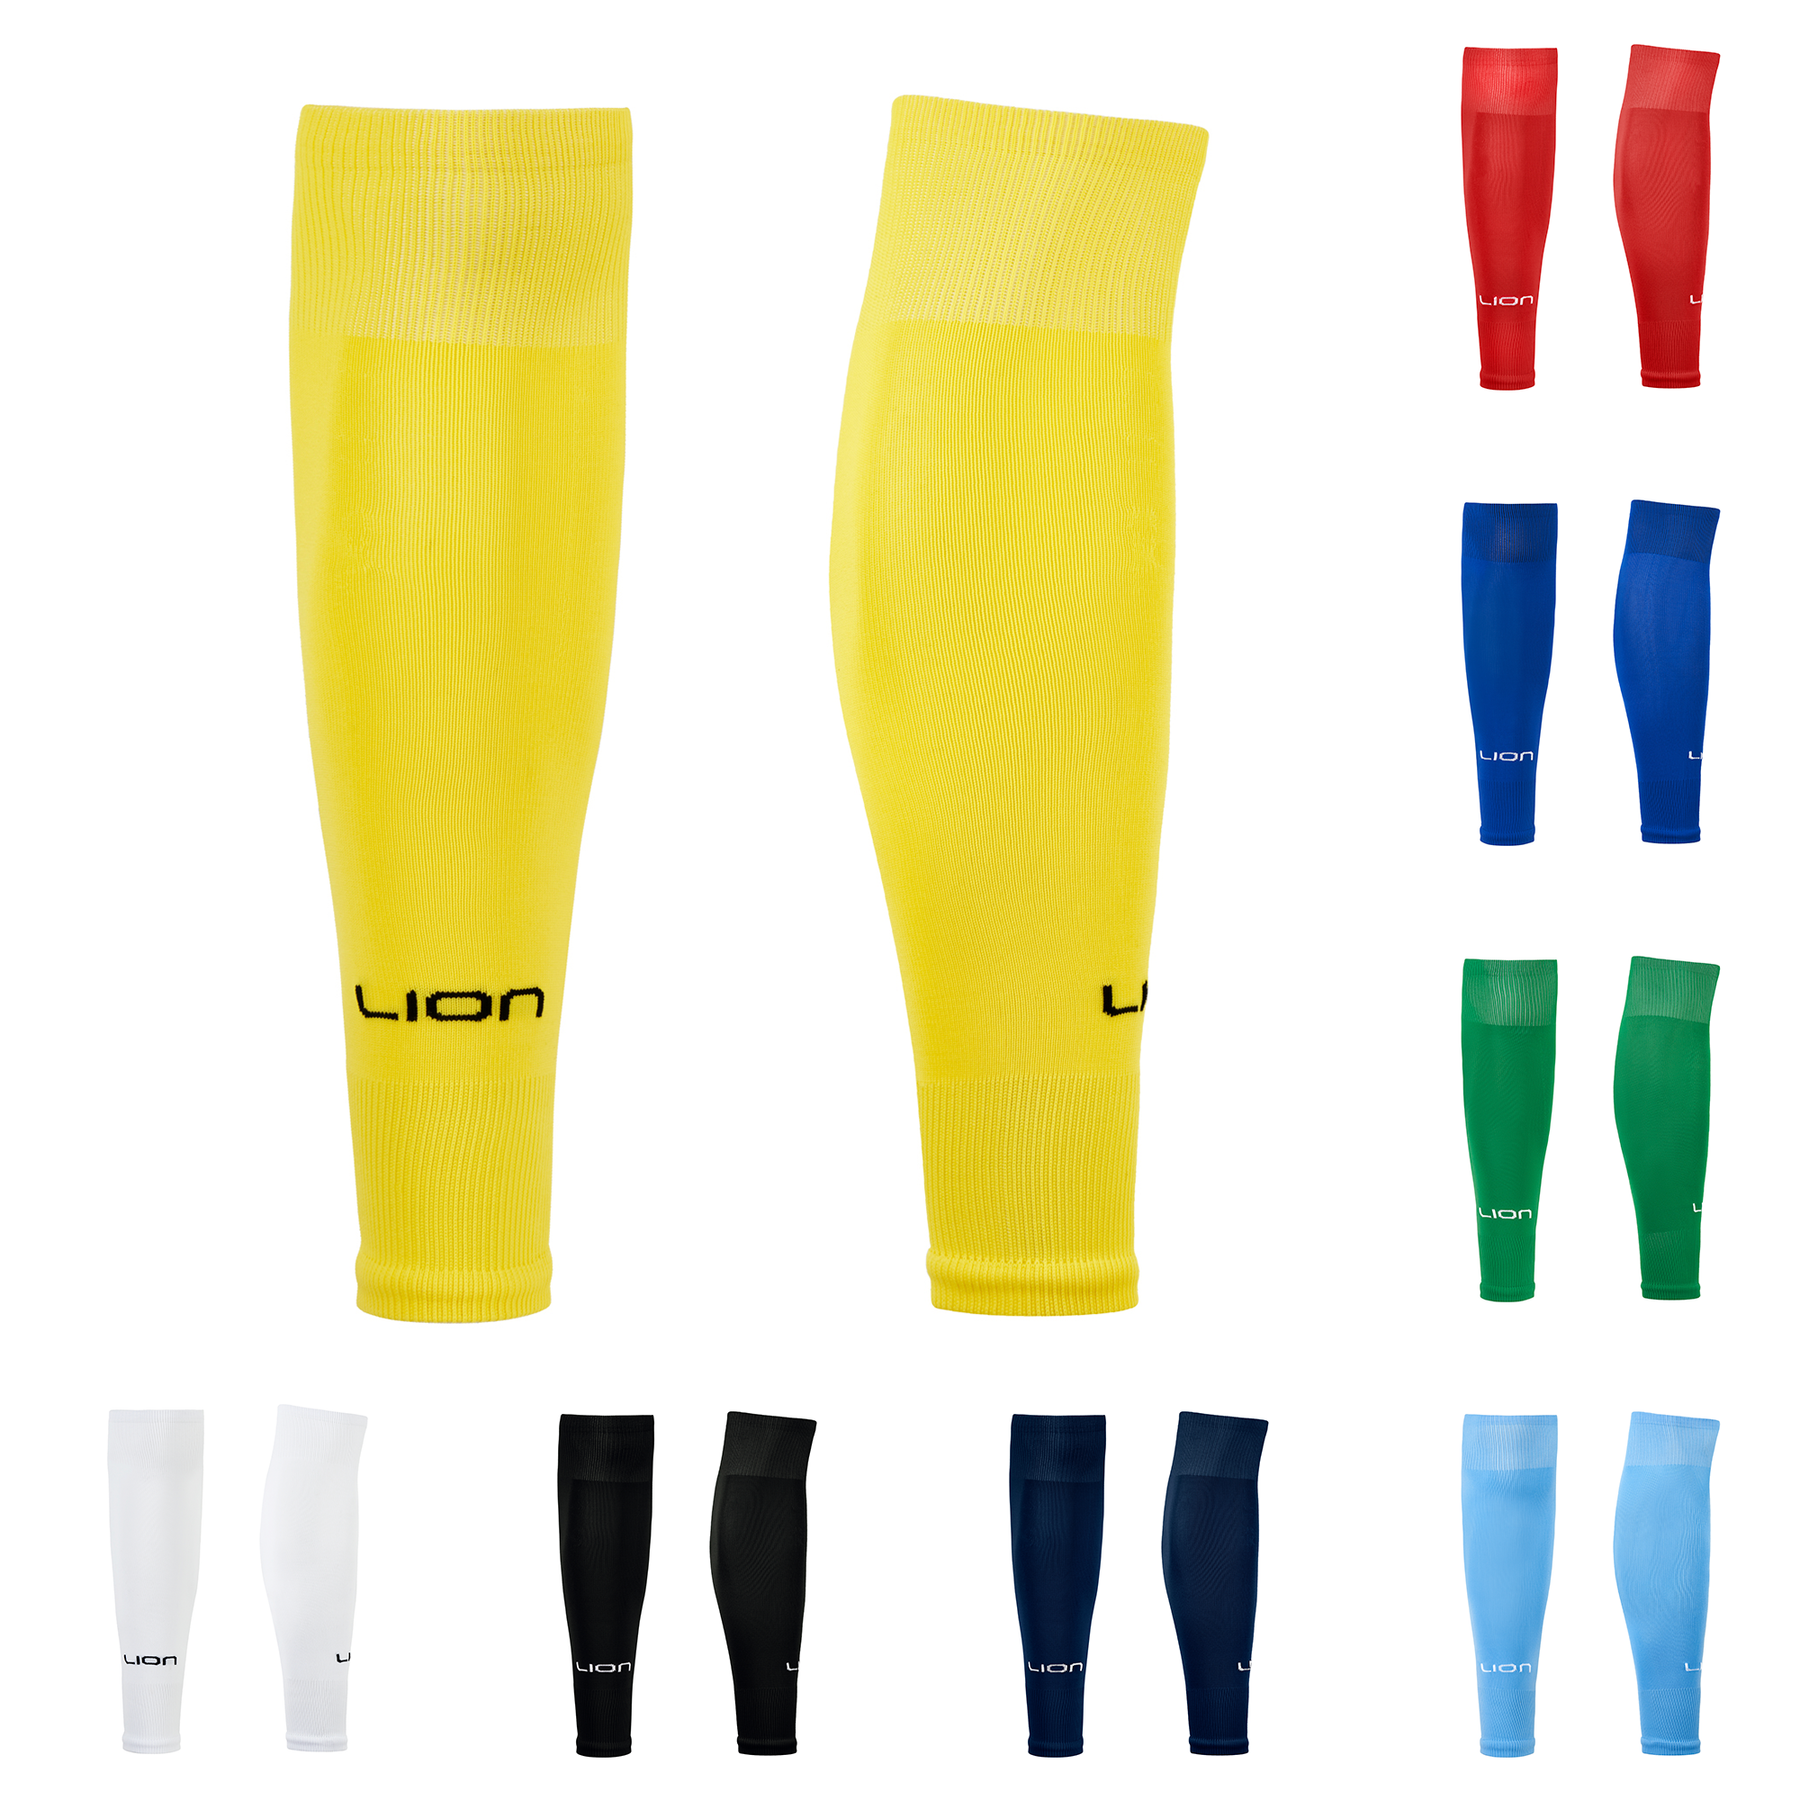 Wholesale Anti Slip Football Socks In A Range Of Cuts And Colors